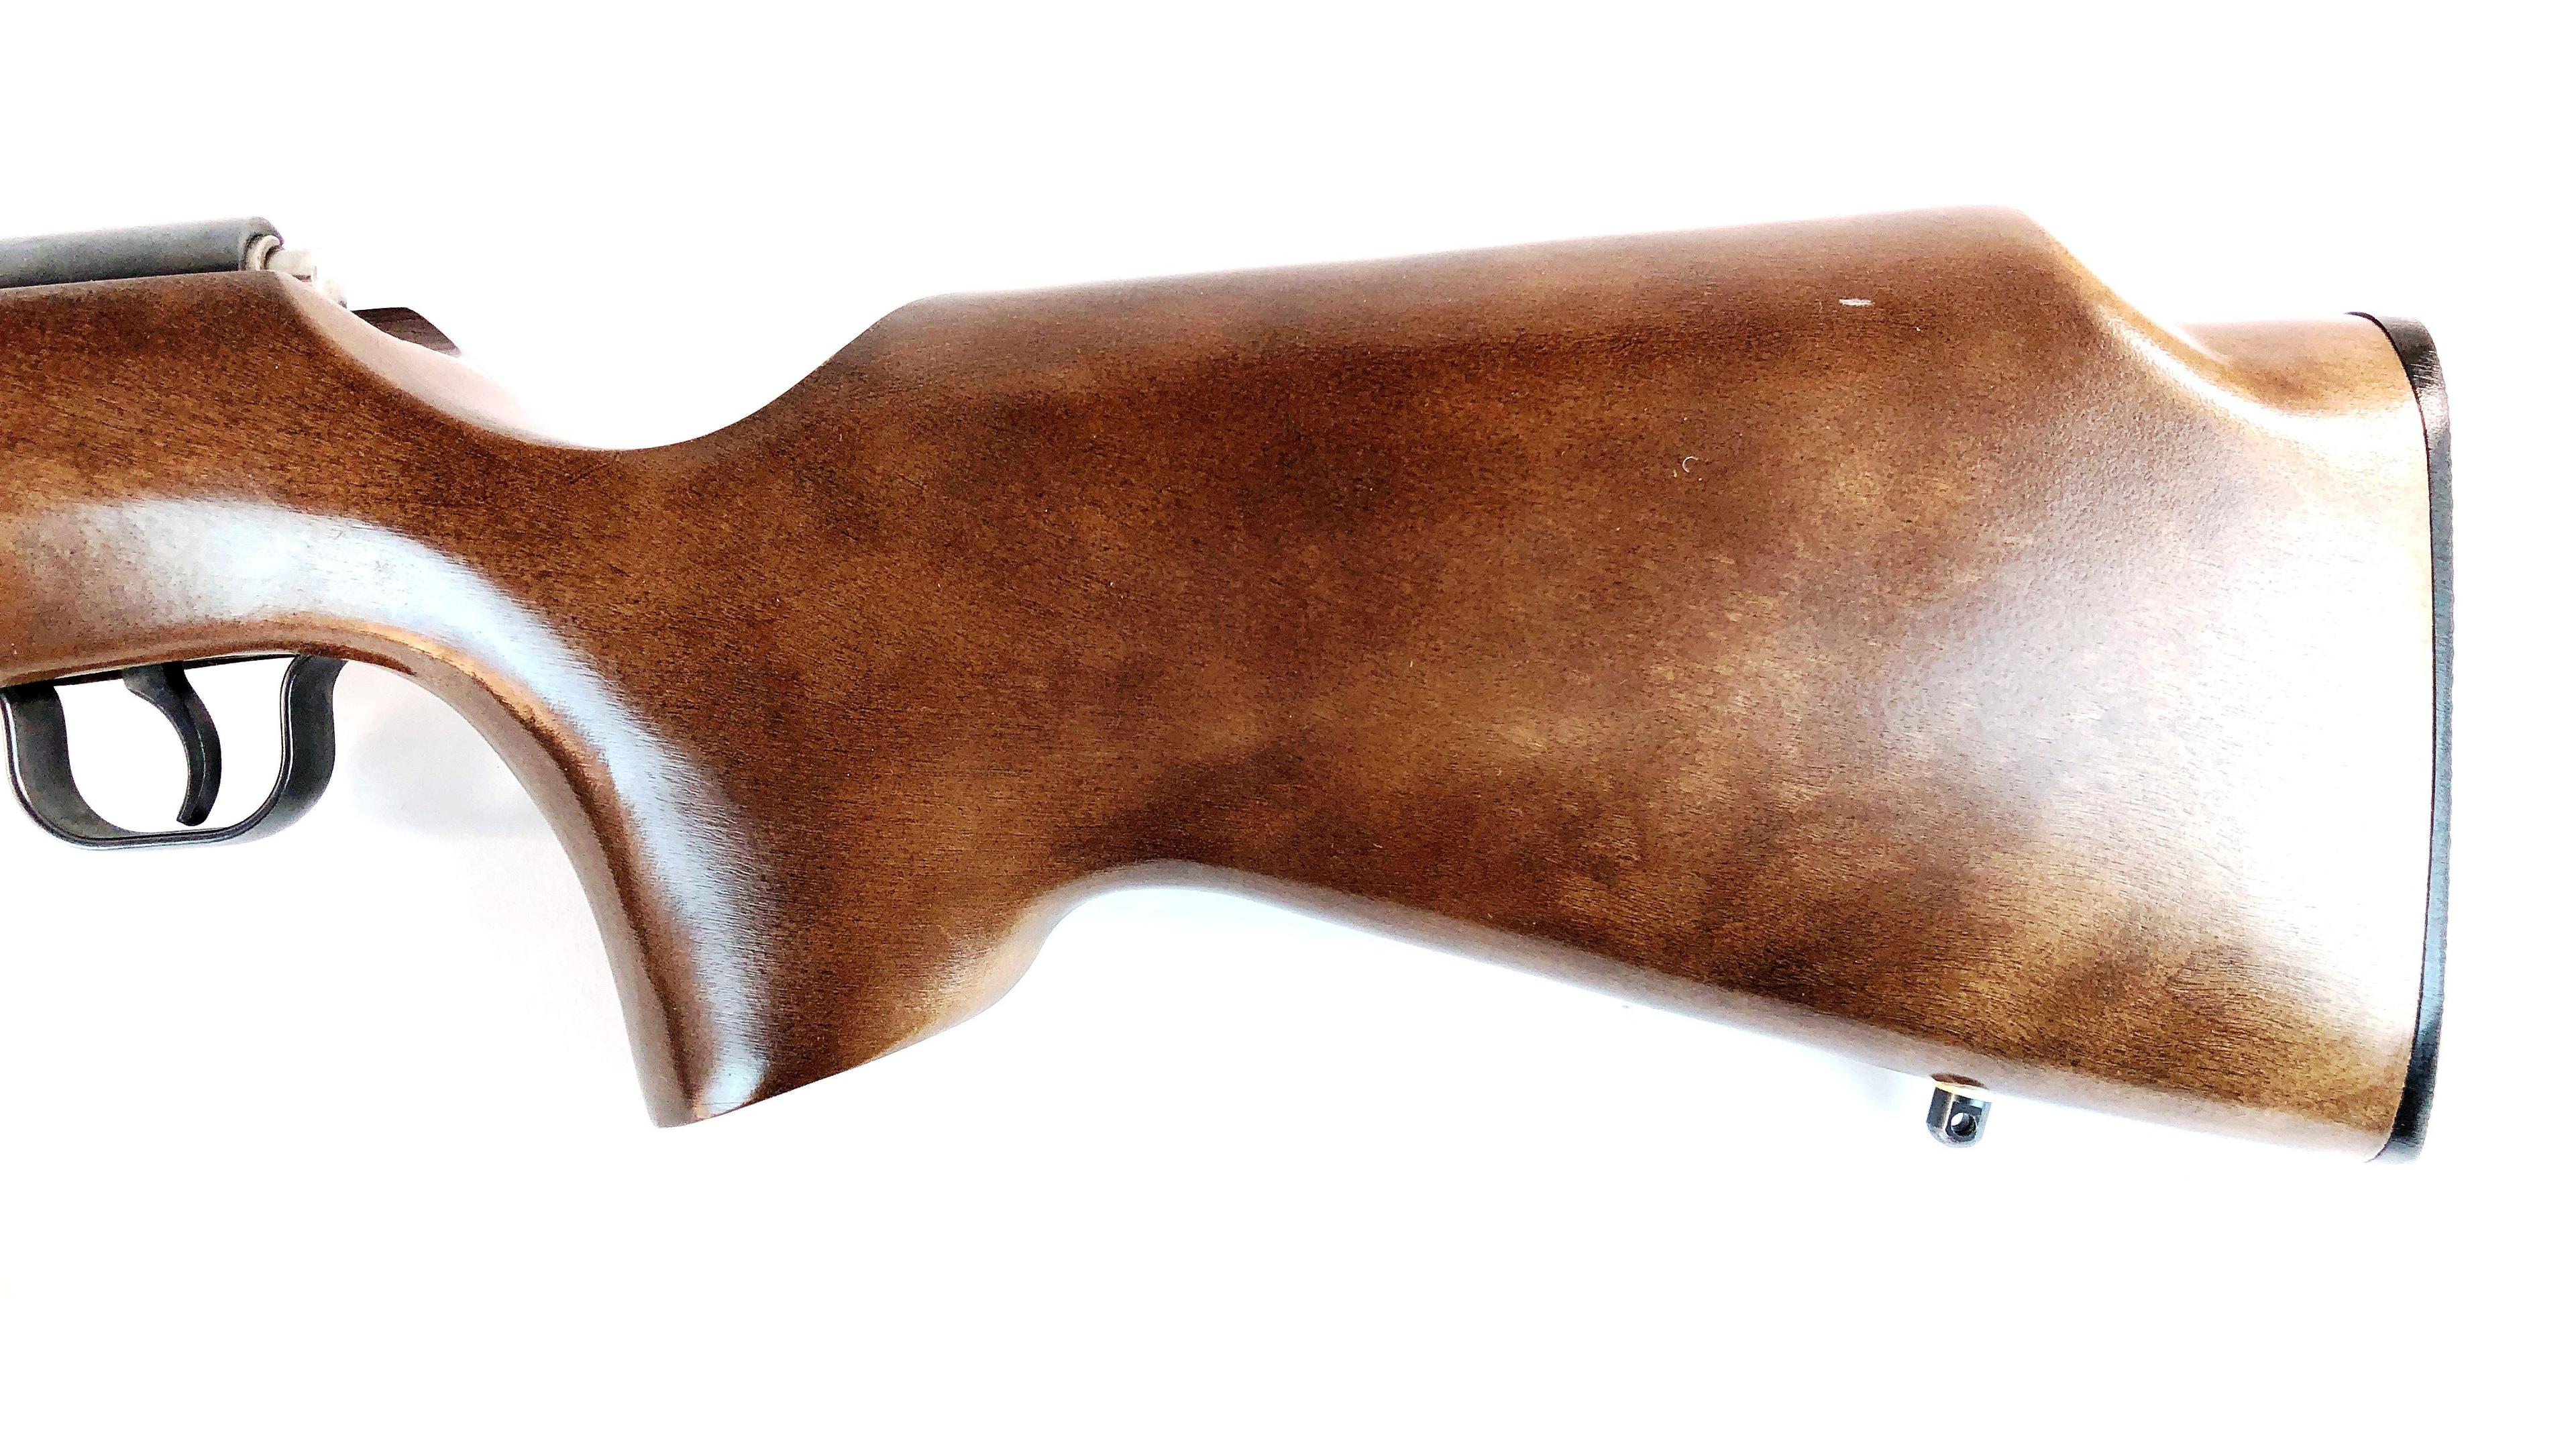 Canada Lakefield Arms Gun 92S Silhouette .22 LR Bolt Action Repeater Rifle W/Scope Serial 500146